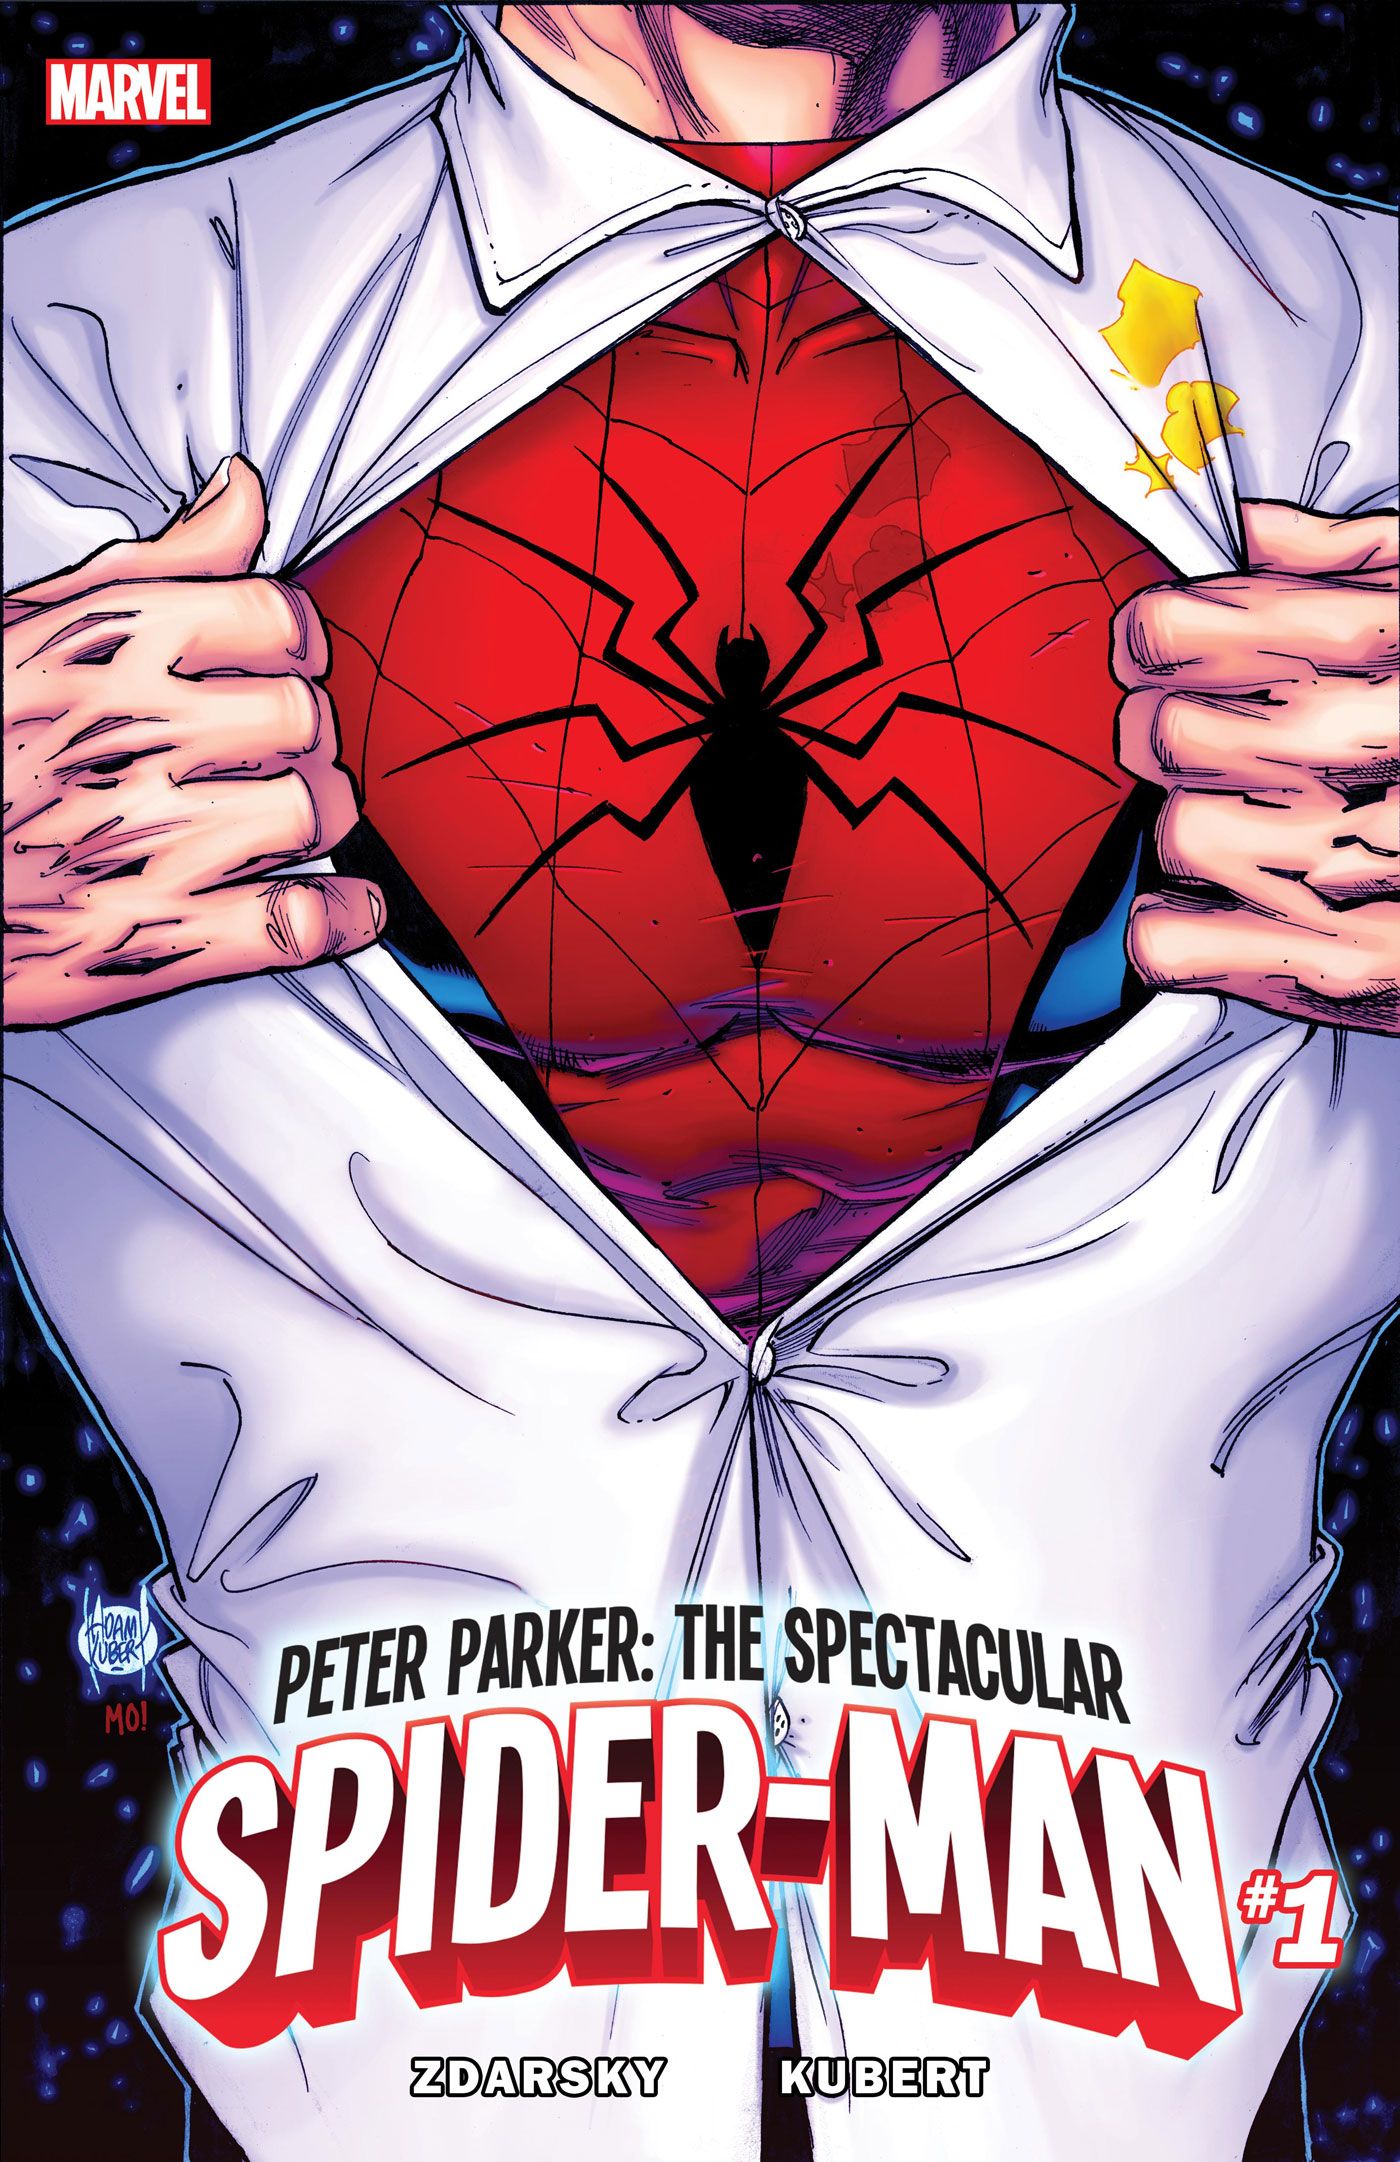 Peter Parker: The Spectacular Spider-Man #1 cover